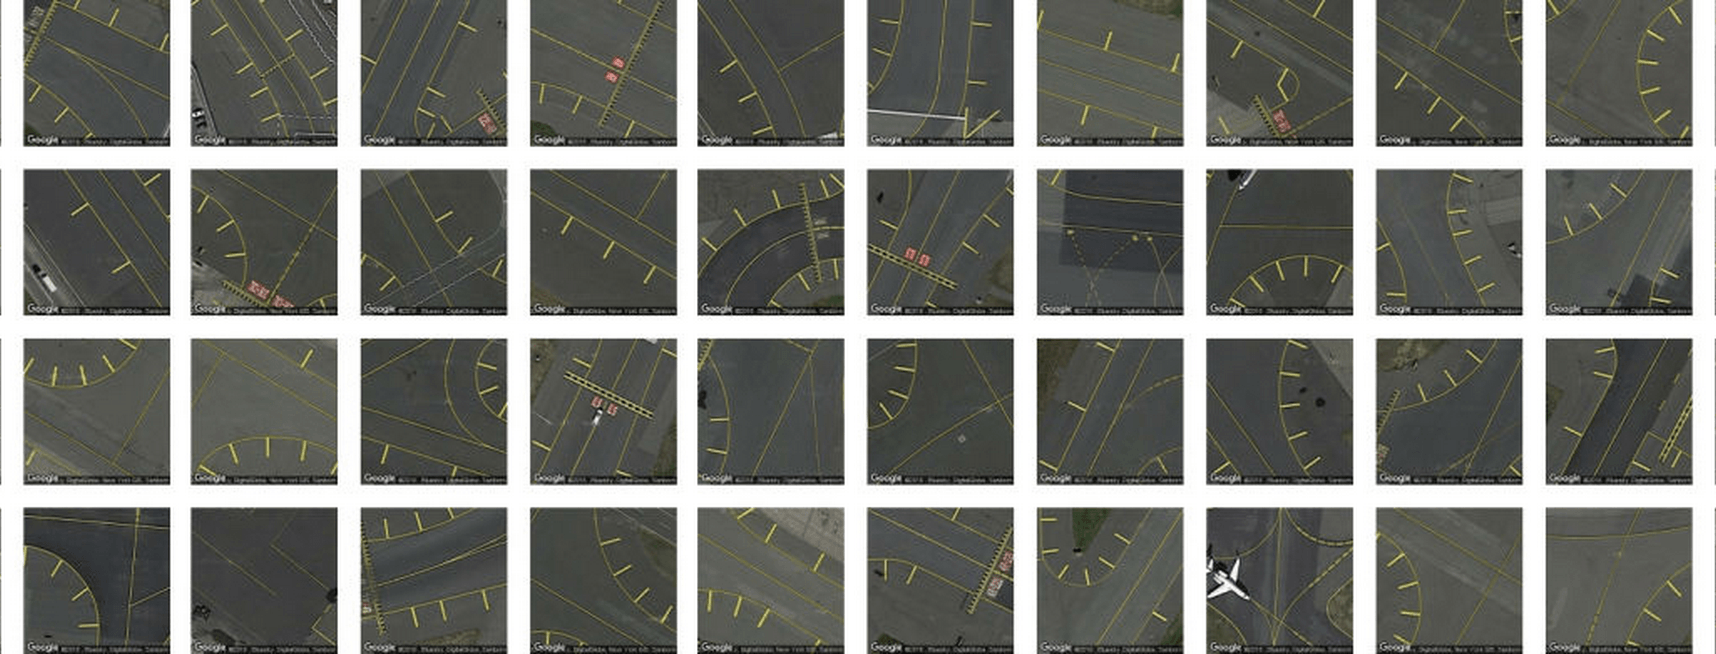 roads gathered with terrapattern